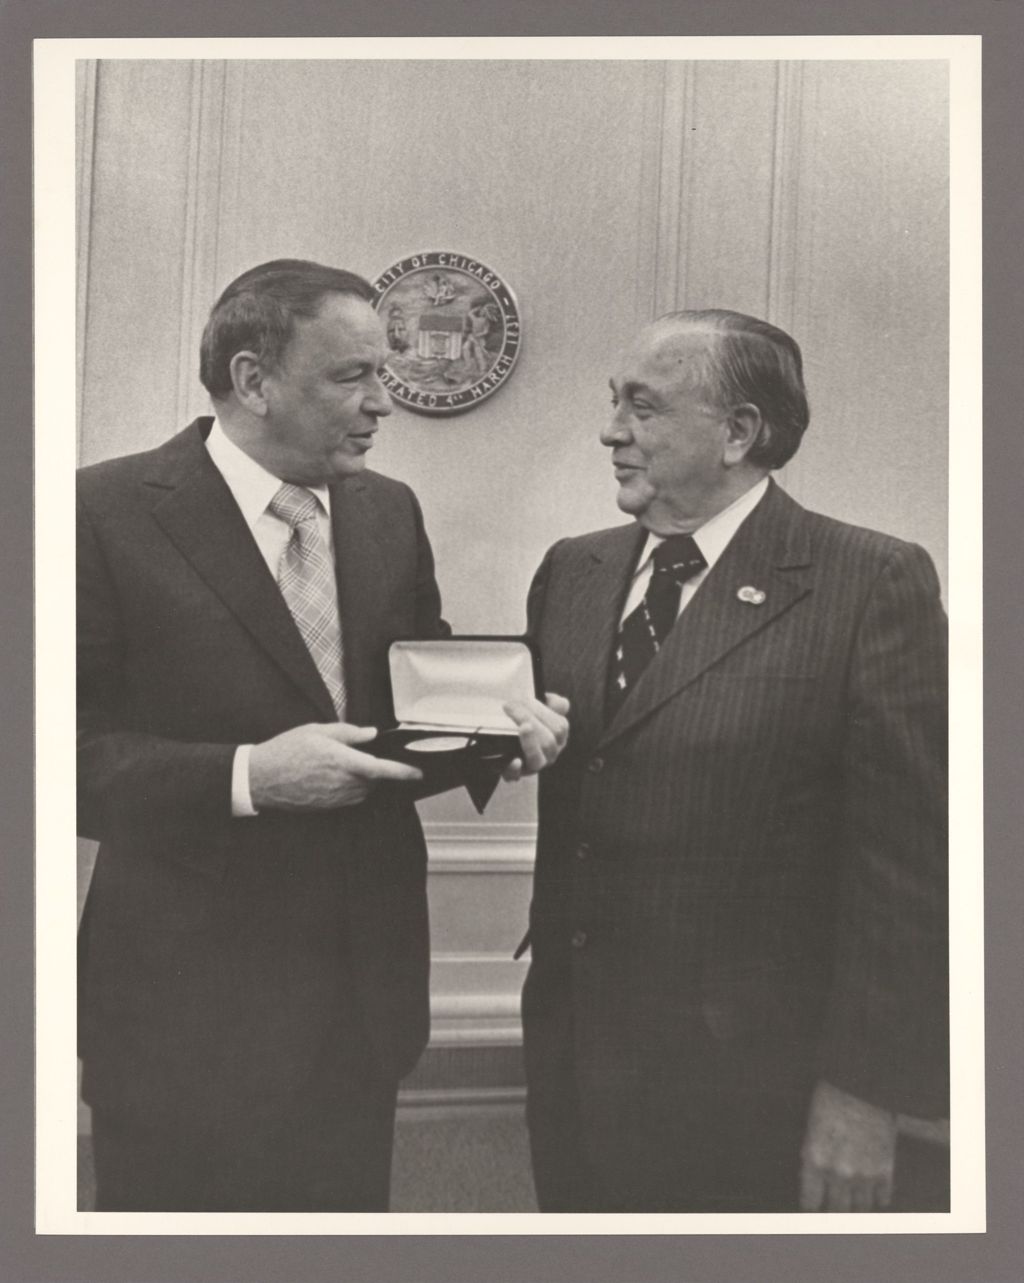 Miniature of Frank Sinatra accepts medal from RIchard J. Daley